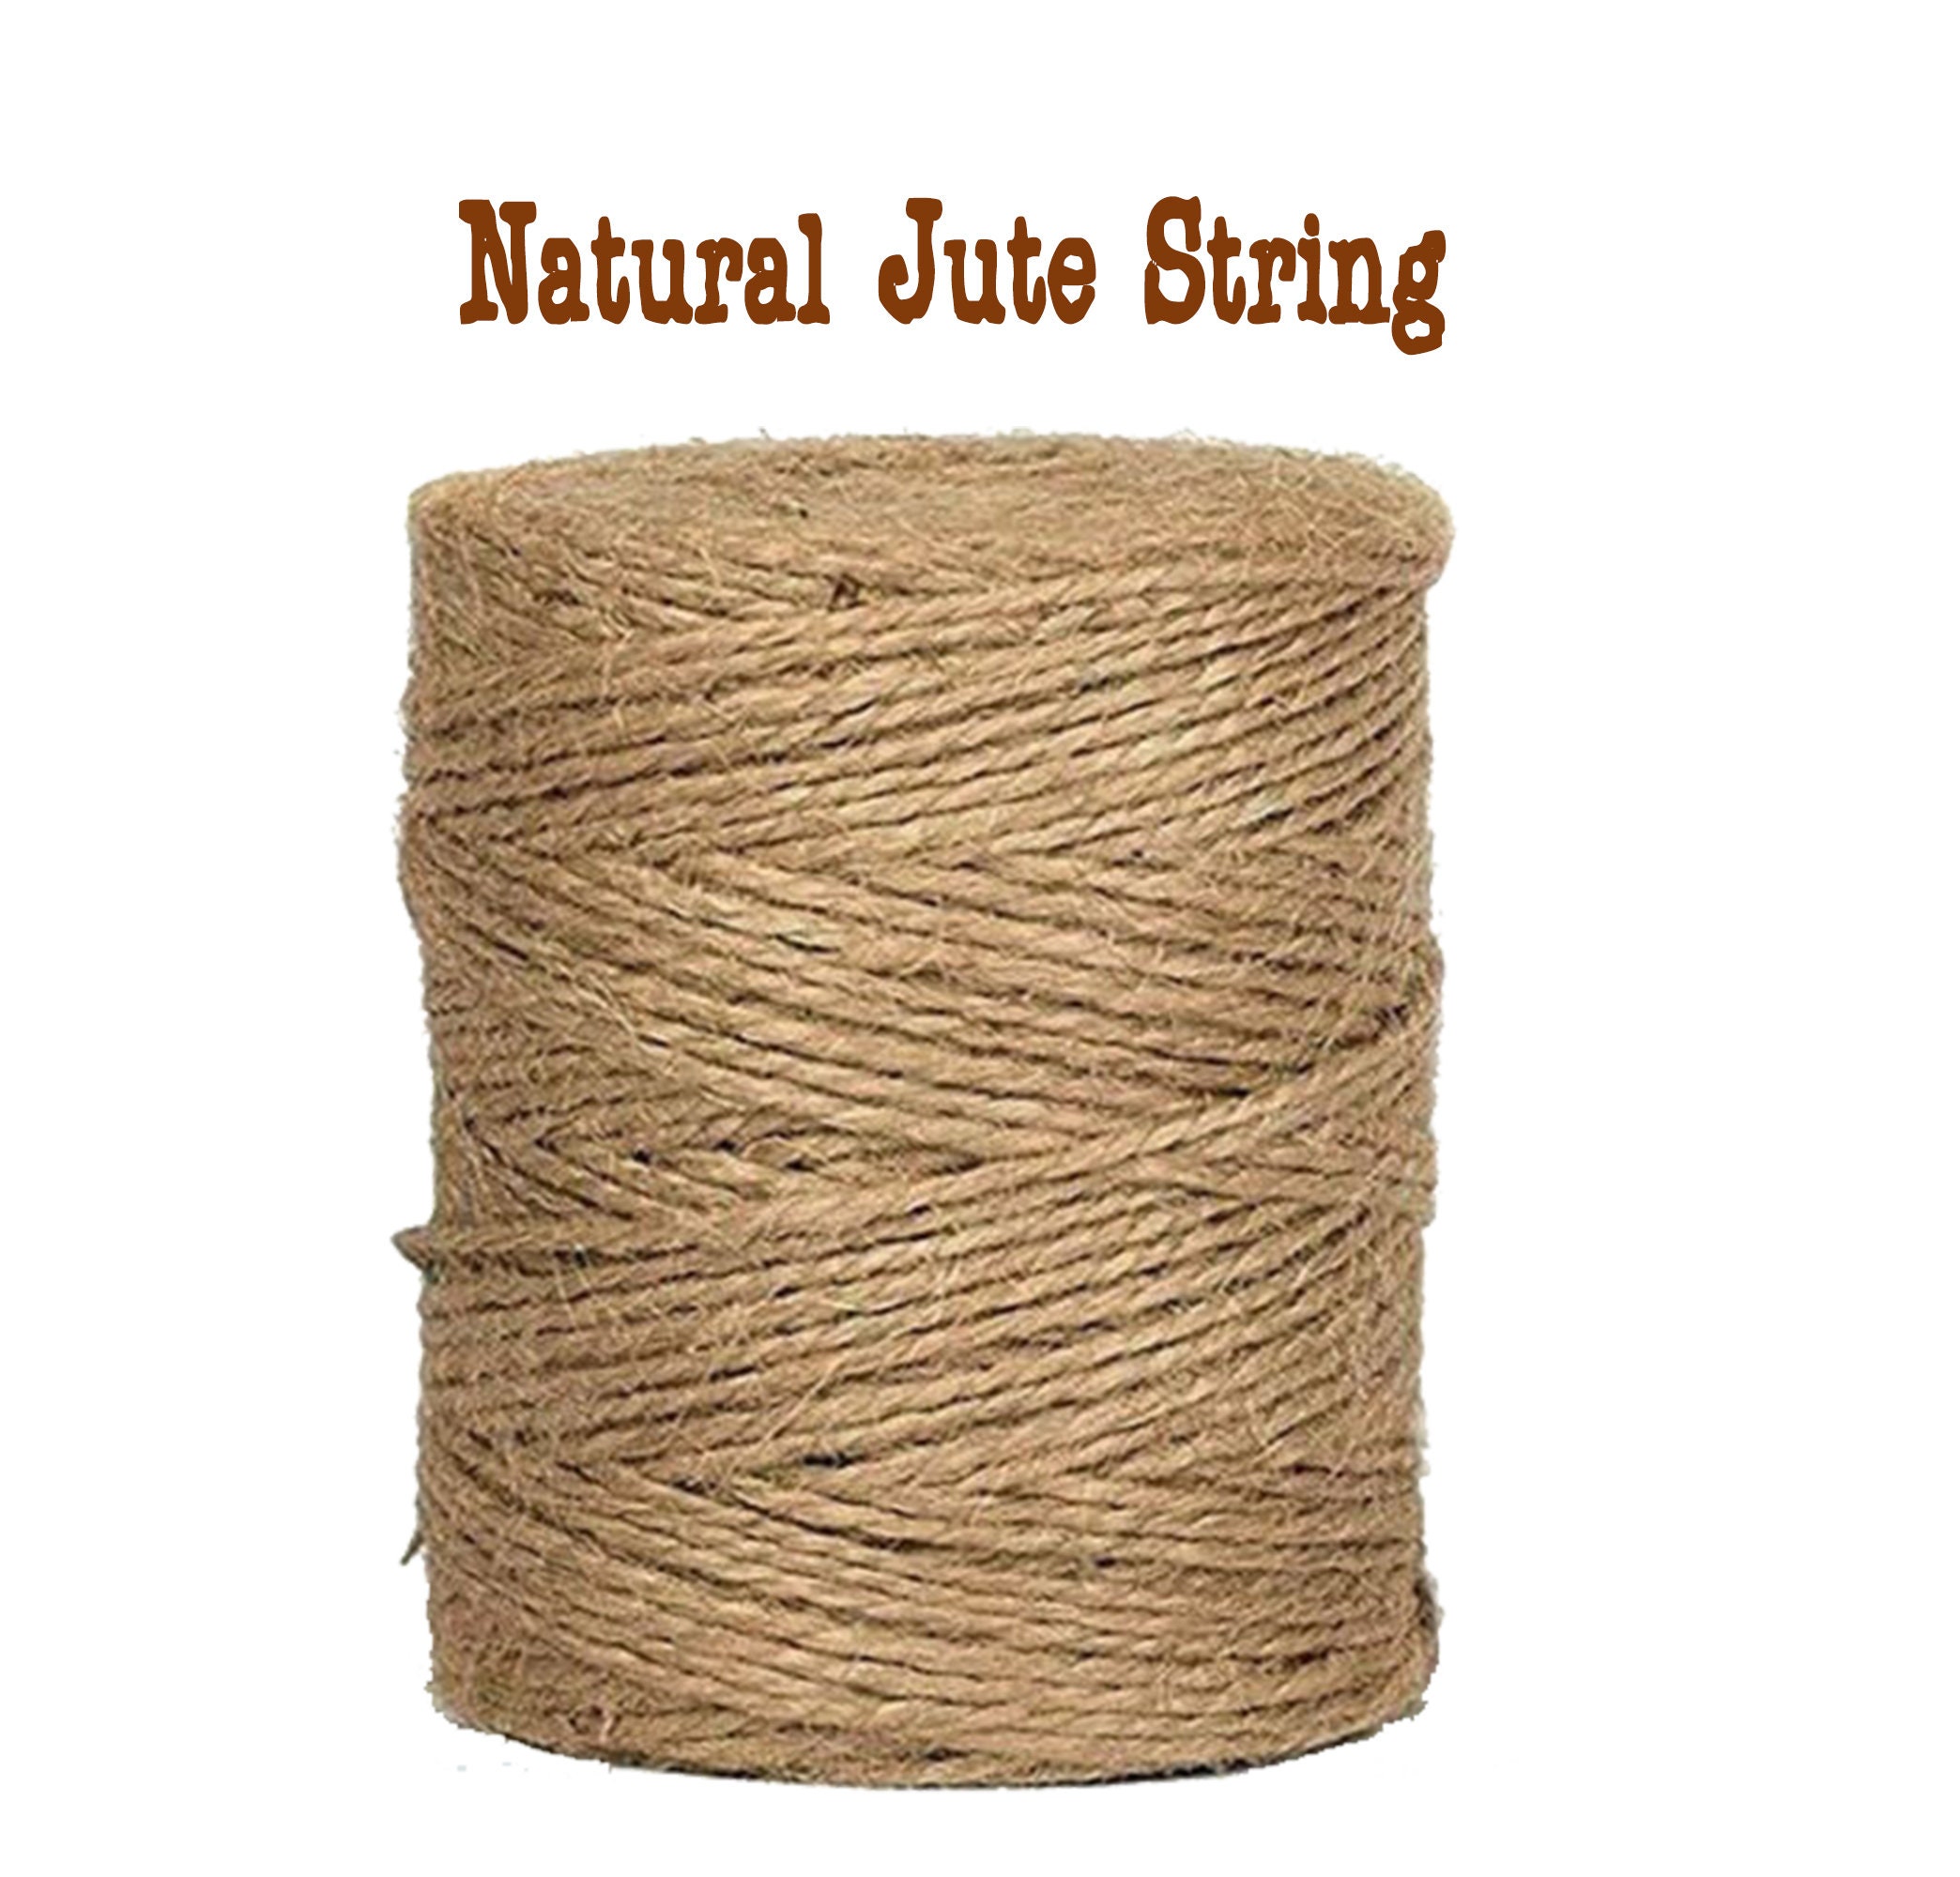 1 to 250m Natural Brown Jute Thread Rustic Hessian Twine String Hemp Rope  Cord Bundle for Garden Decoration, Wrapping Gifts, Christmas Xmas 